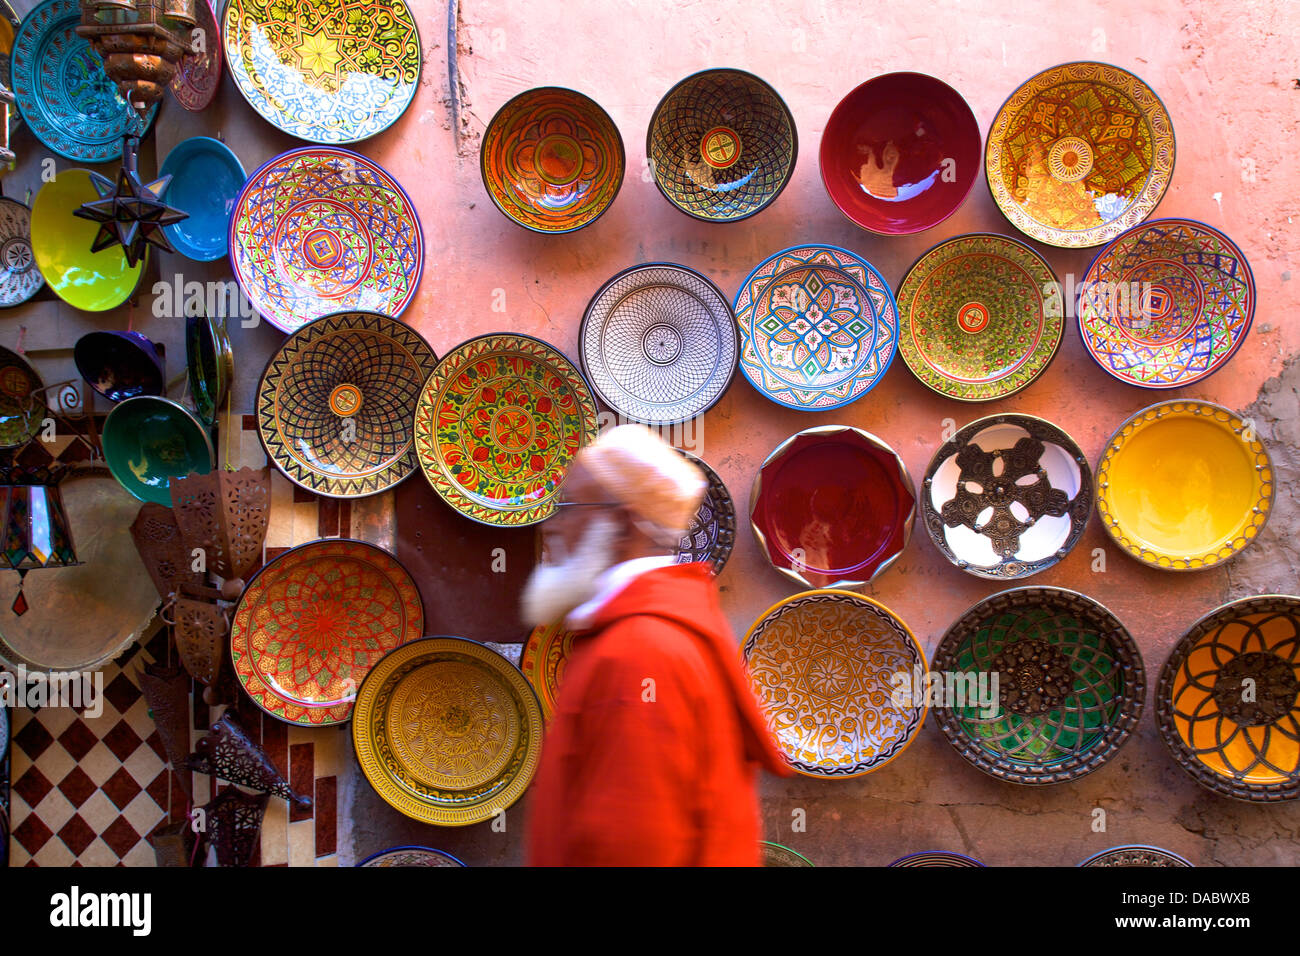 Street scene with Moroccan ceramics, Marrakech, Morocco, North Africa, Africa Stock Photo